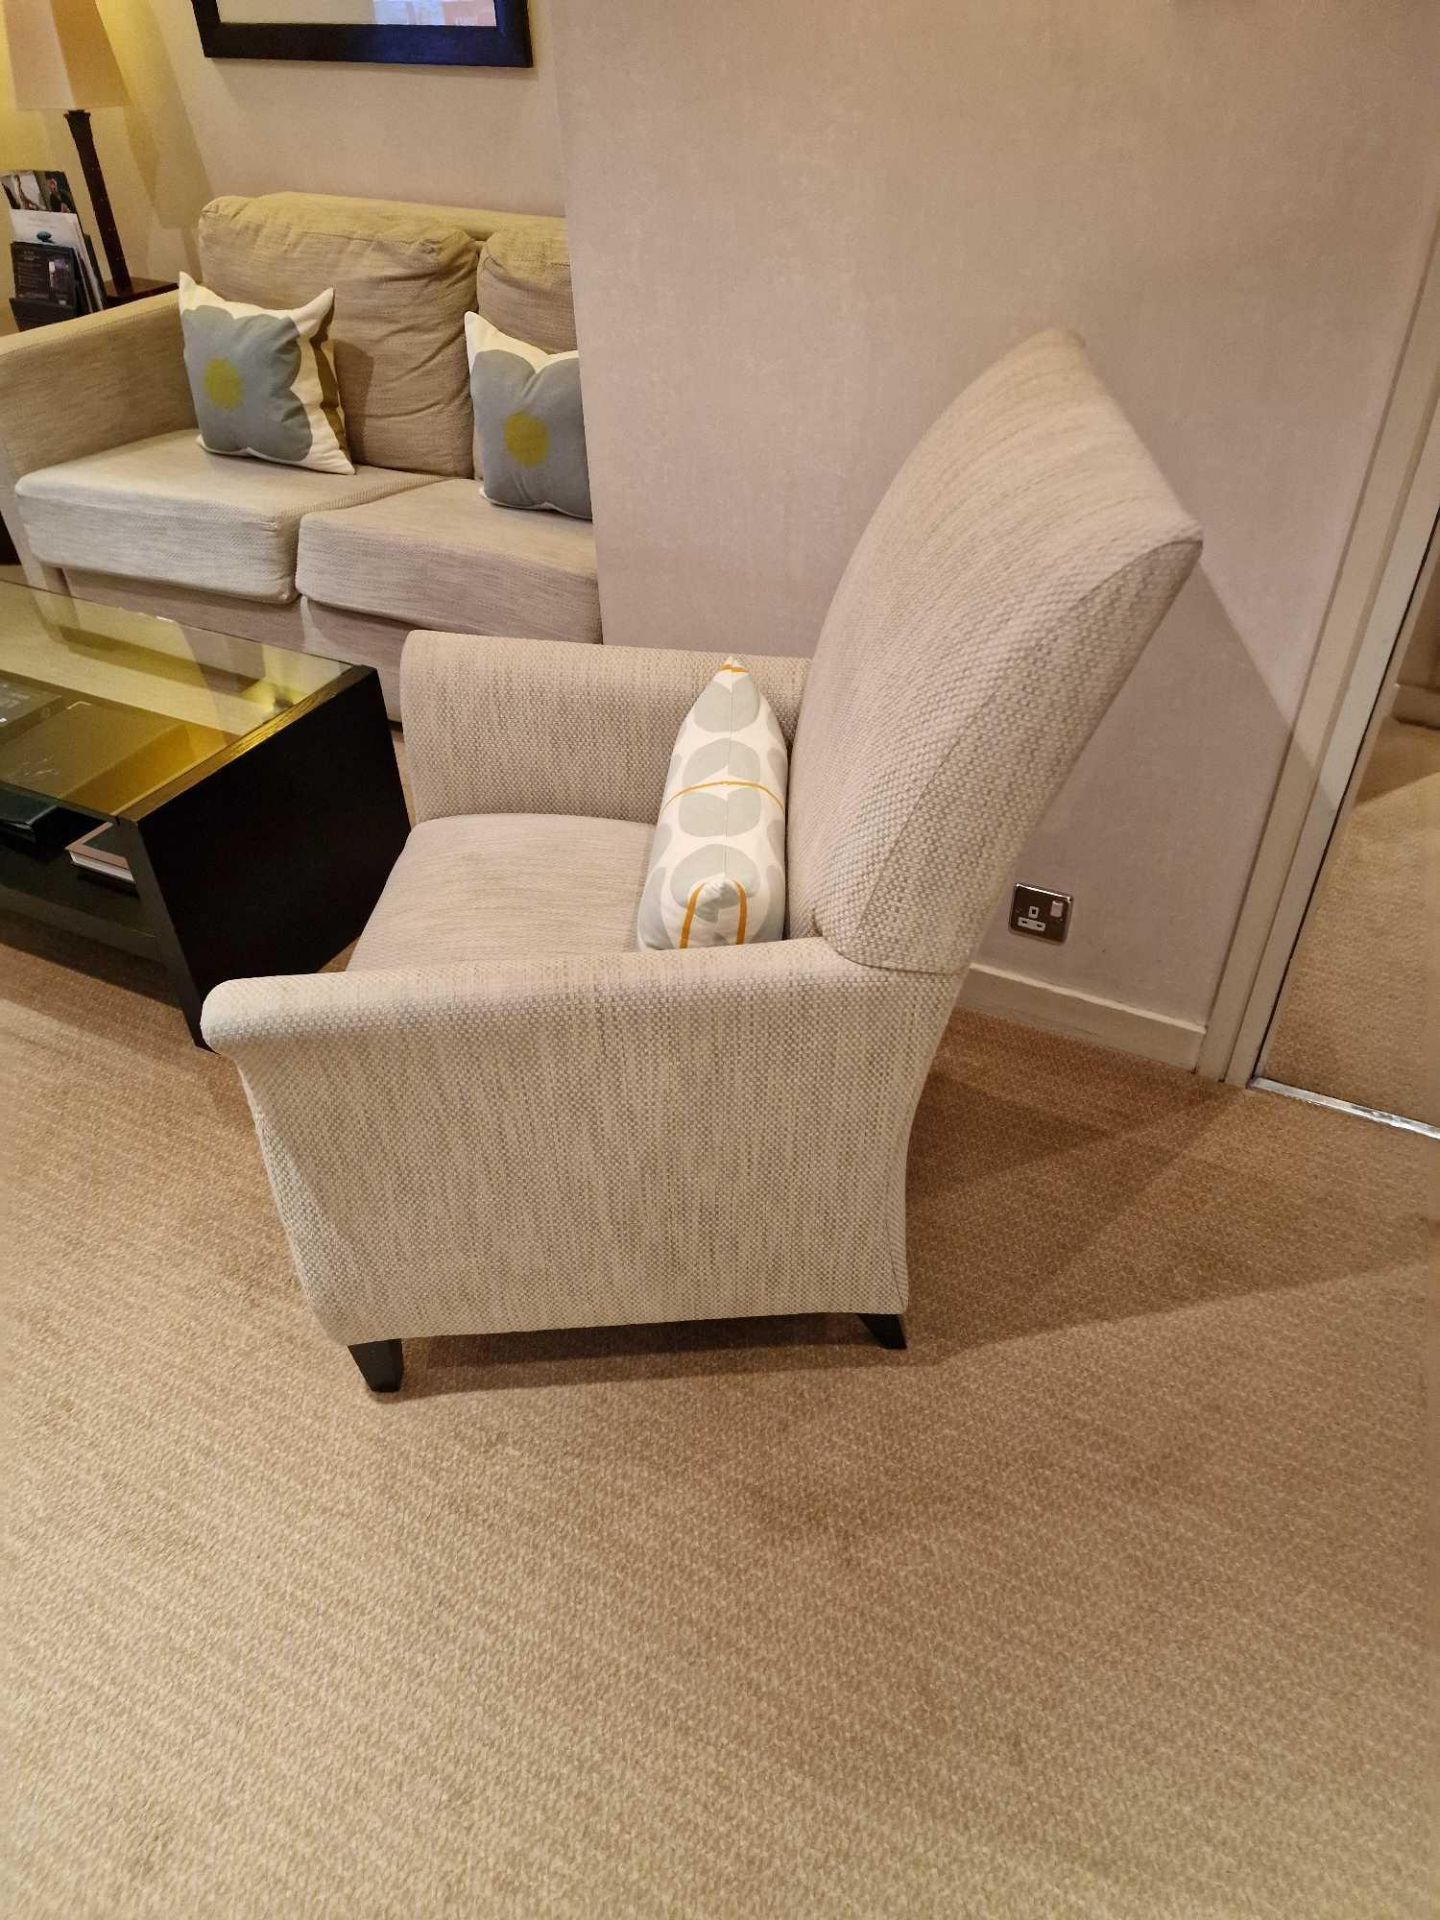 Bernhardt Hospitality Upholstered Lounge Chair In Oatmeal Coloured Fabric On Solid Hardwood Spring - Image 2 of 5